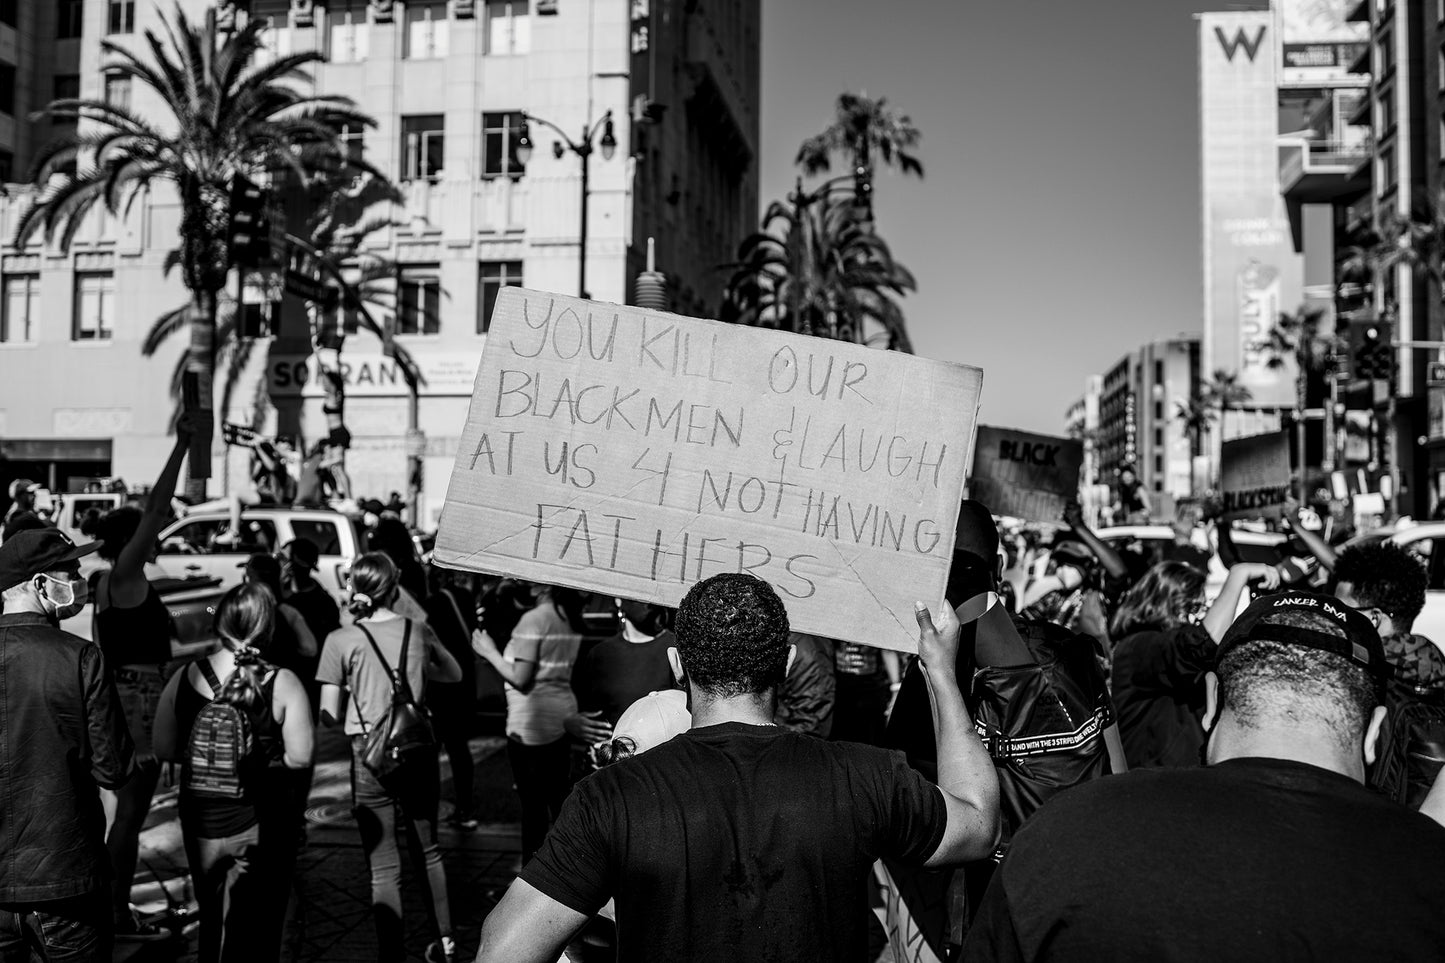 Shot from behind, the image portrays a man standing amidst a sea of people, his raised Black Lives Matter cardboard sign bearing a powerful message: "You kill our Black Men & laugh at us for not having fathers." 